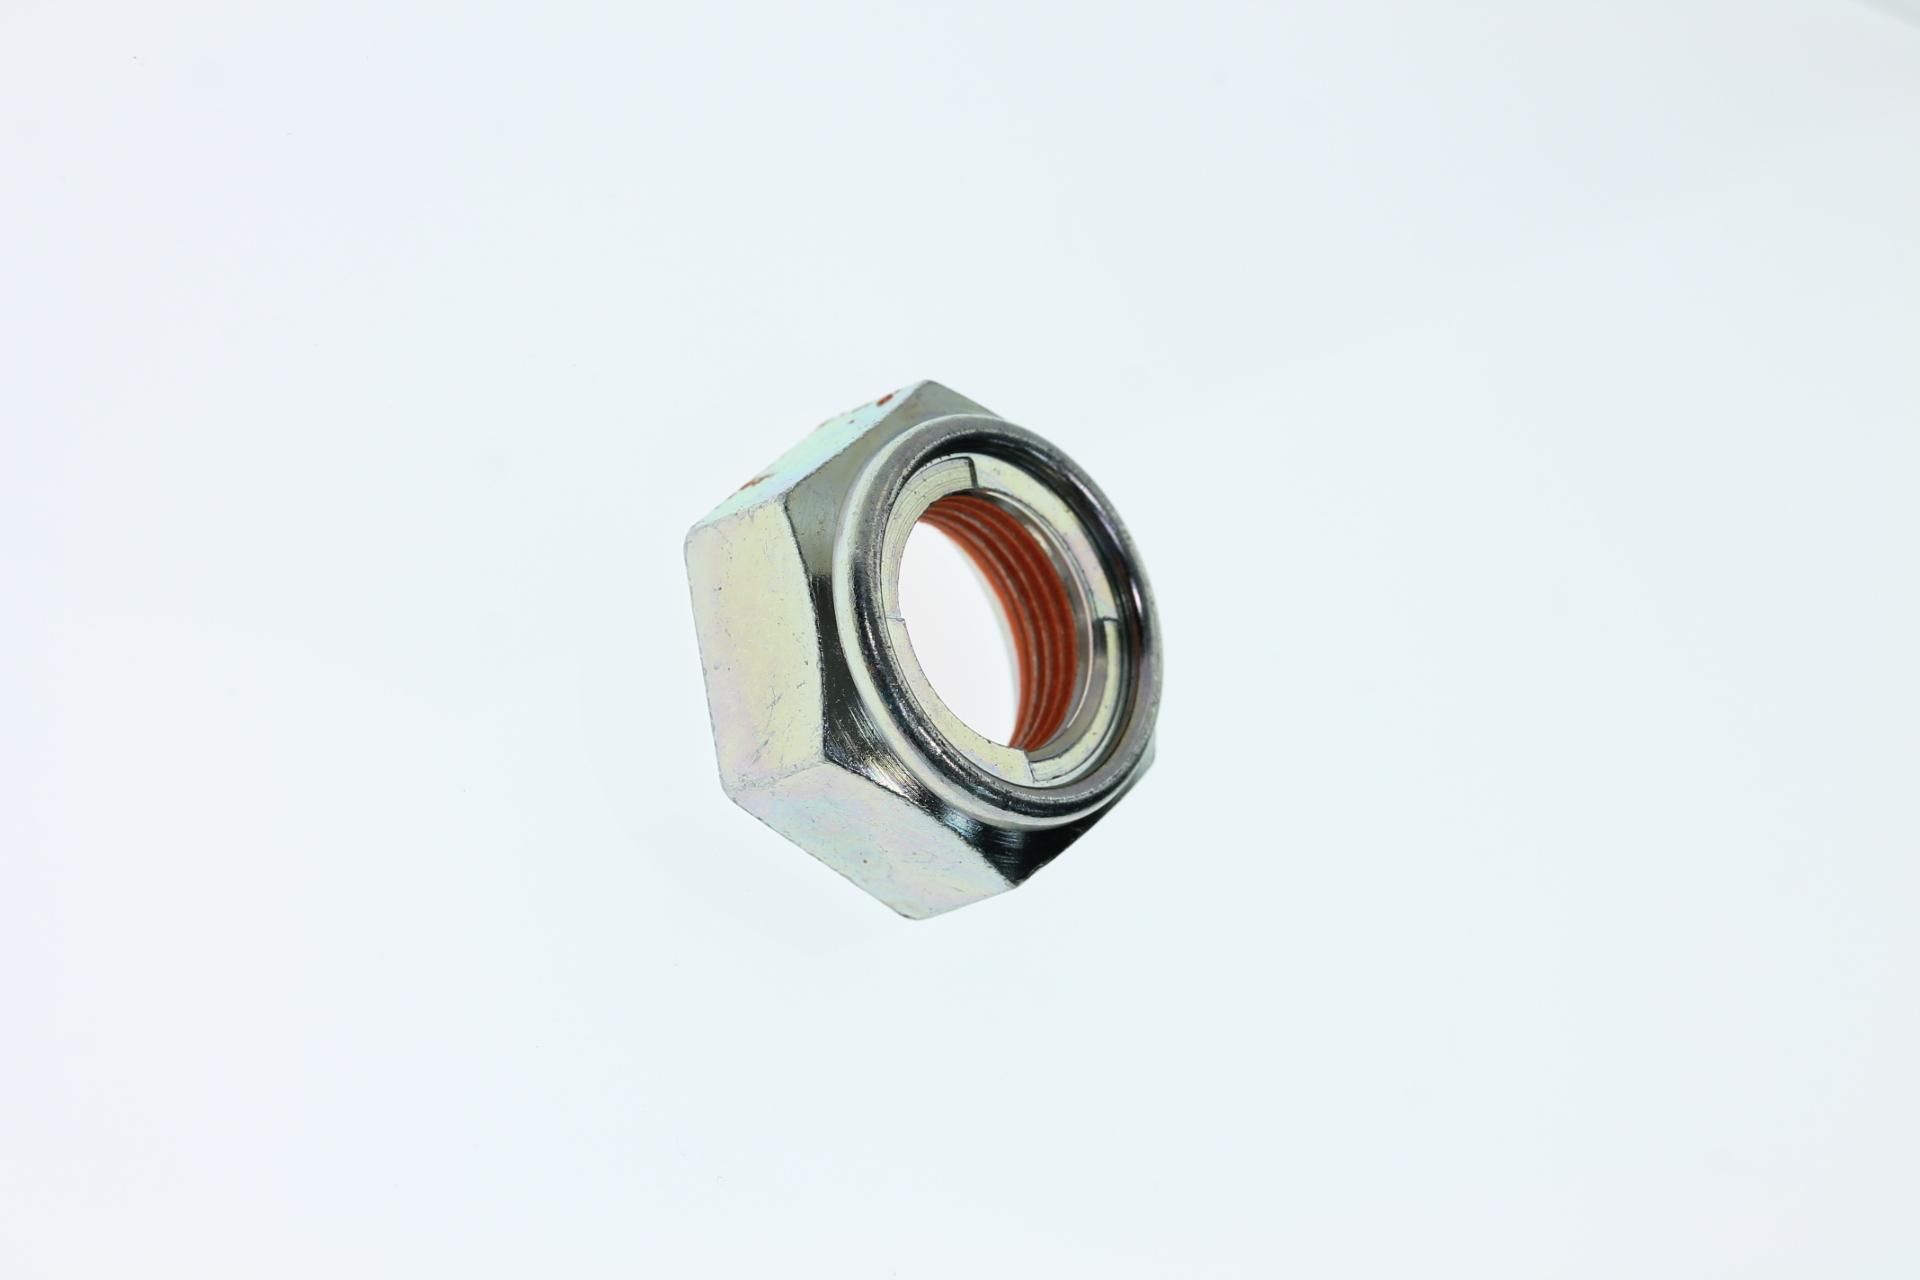 09159-20001 Superseded by 09159-20004 - NUT 20MM